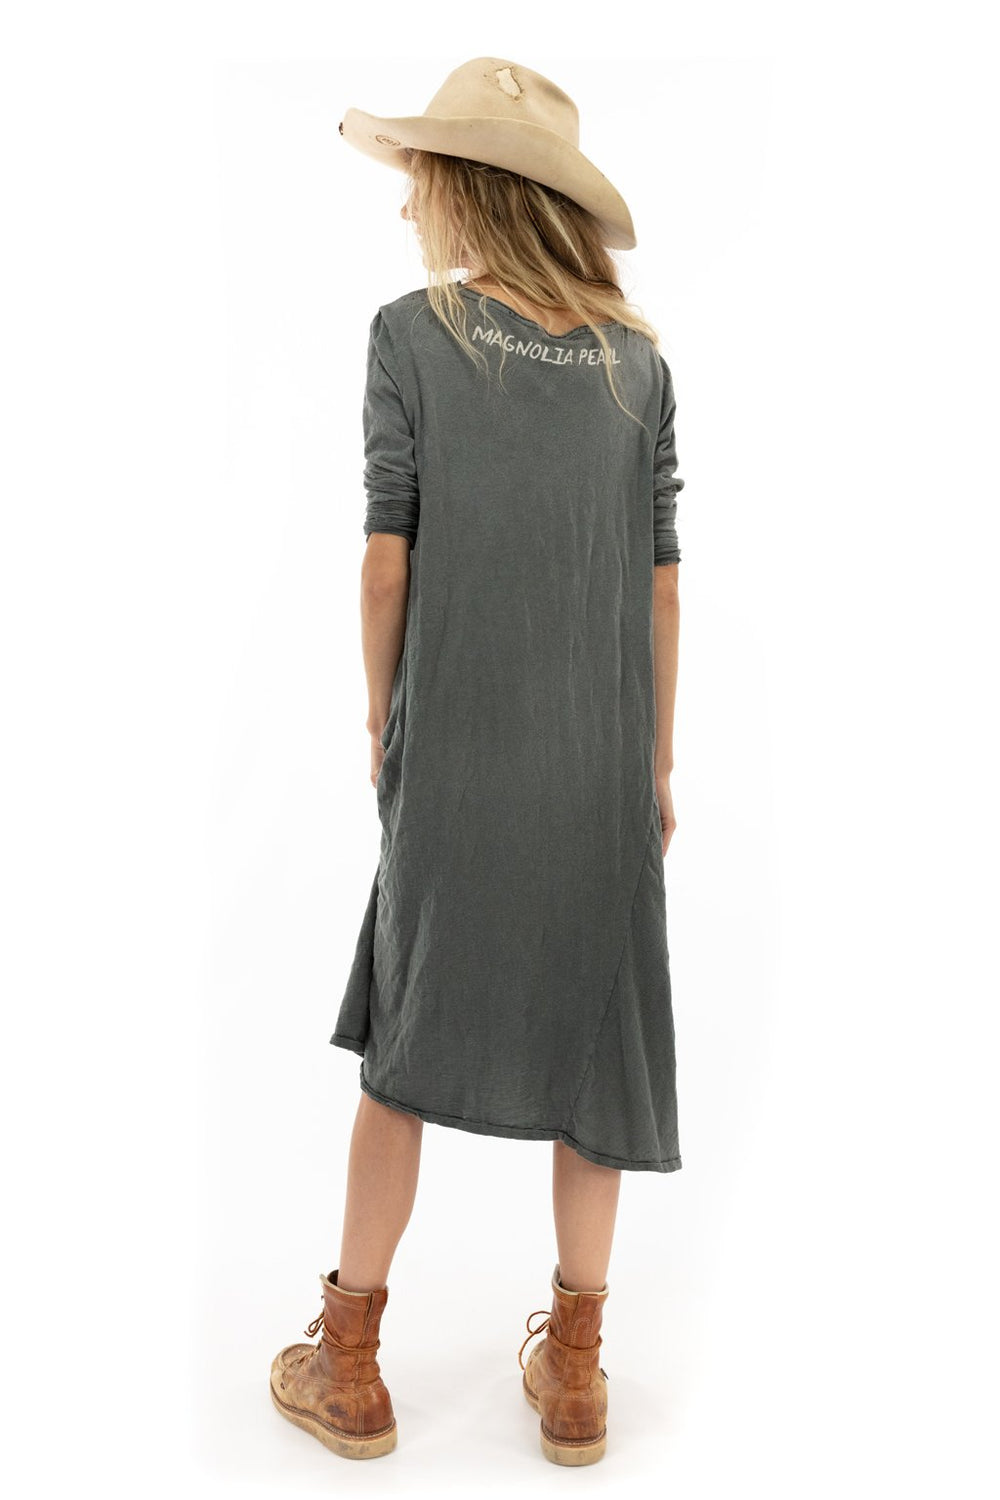 OZZY DYLAN TEE DRESS - Kingfisher Road - Online Boutique